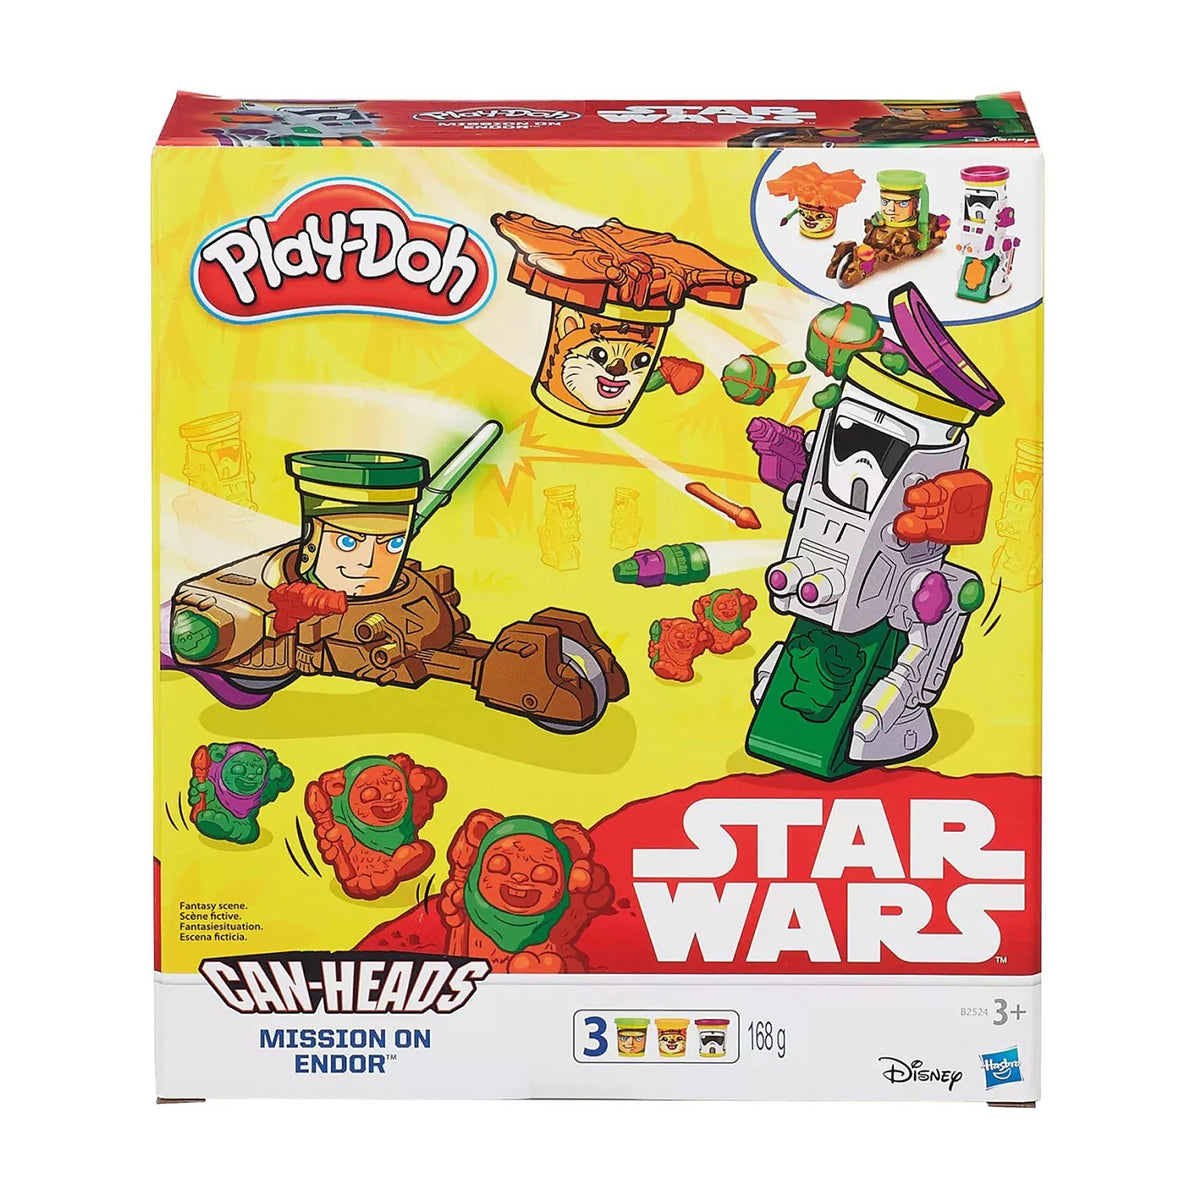 Play-Doh - Star Wars Can-Heads